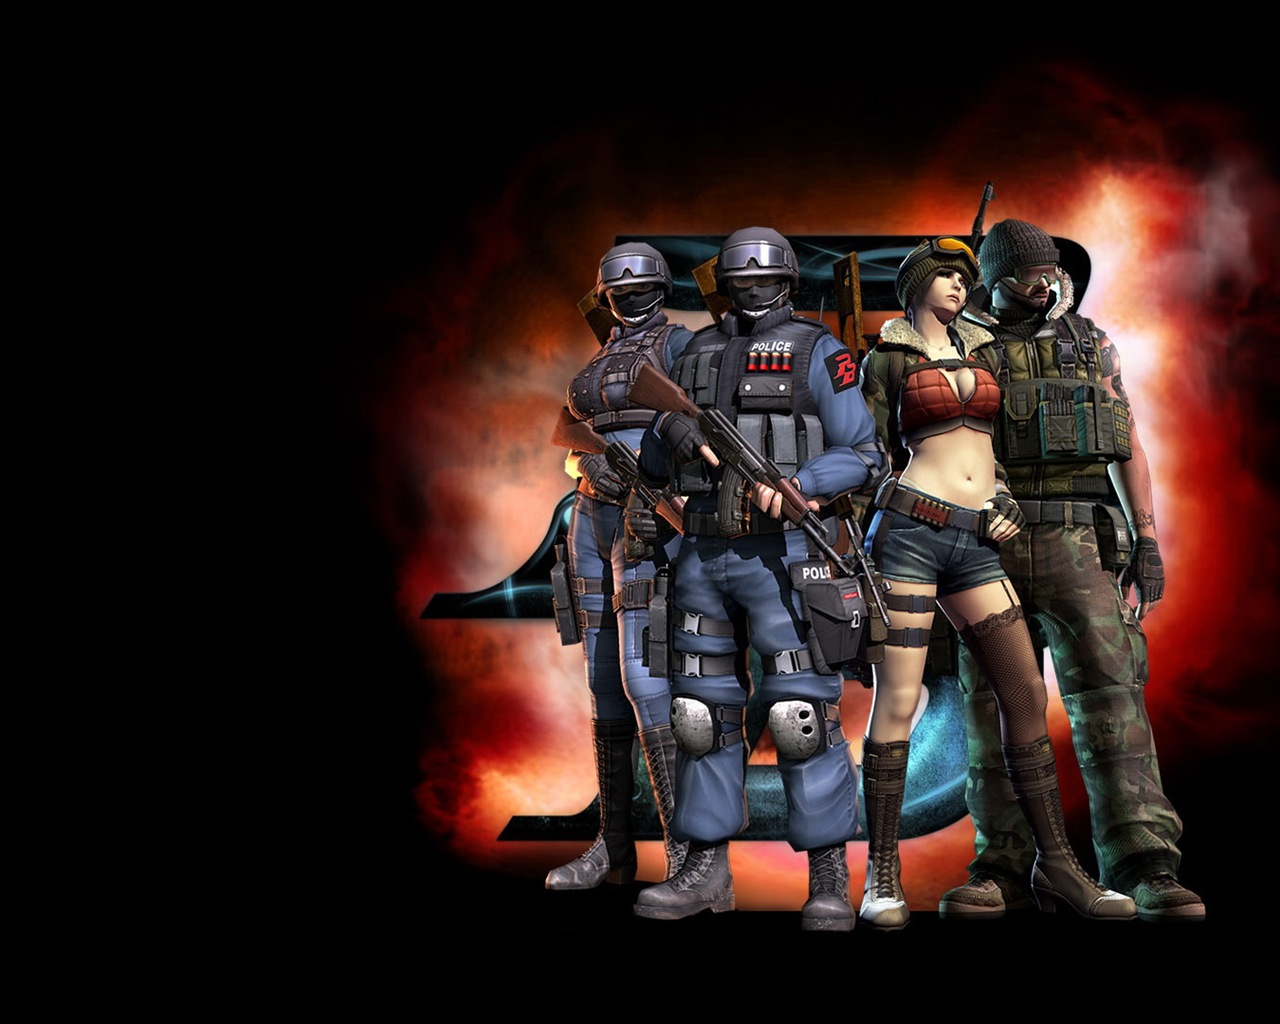 Point Blank HD game wallpapers #14 - 1280x1024